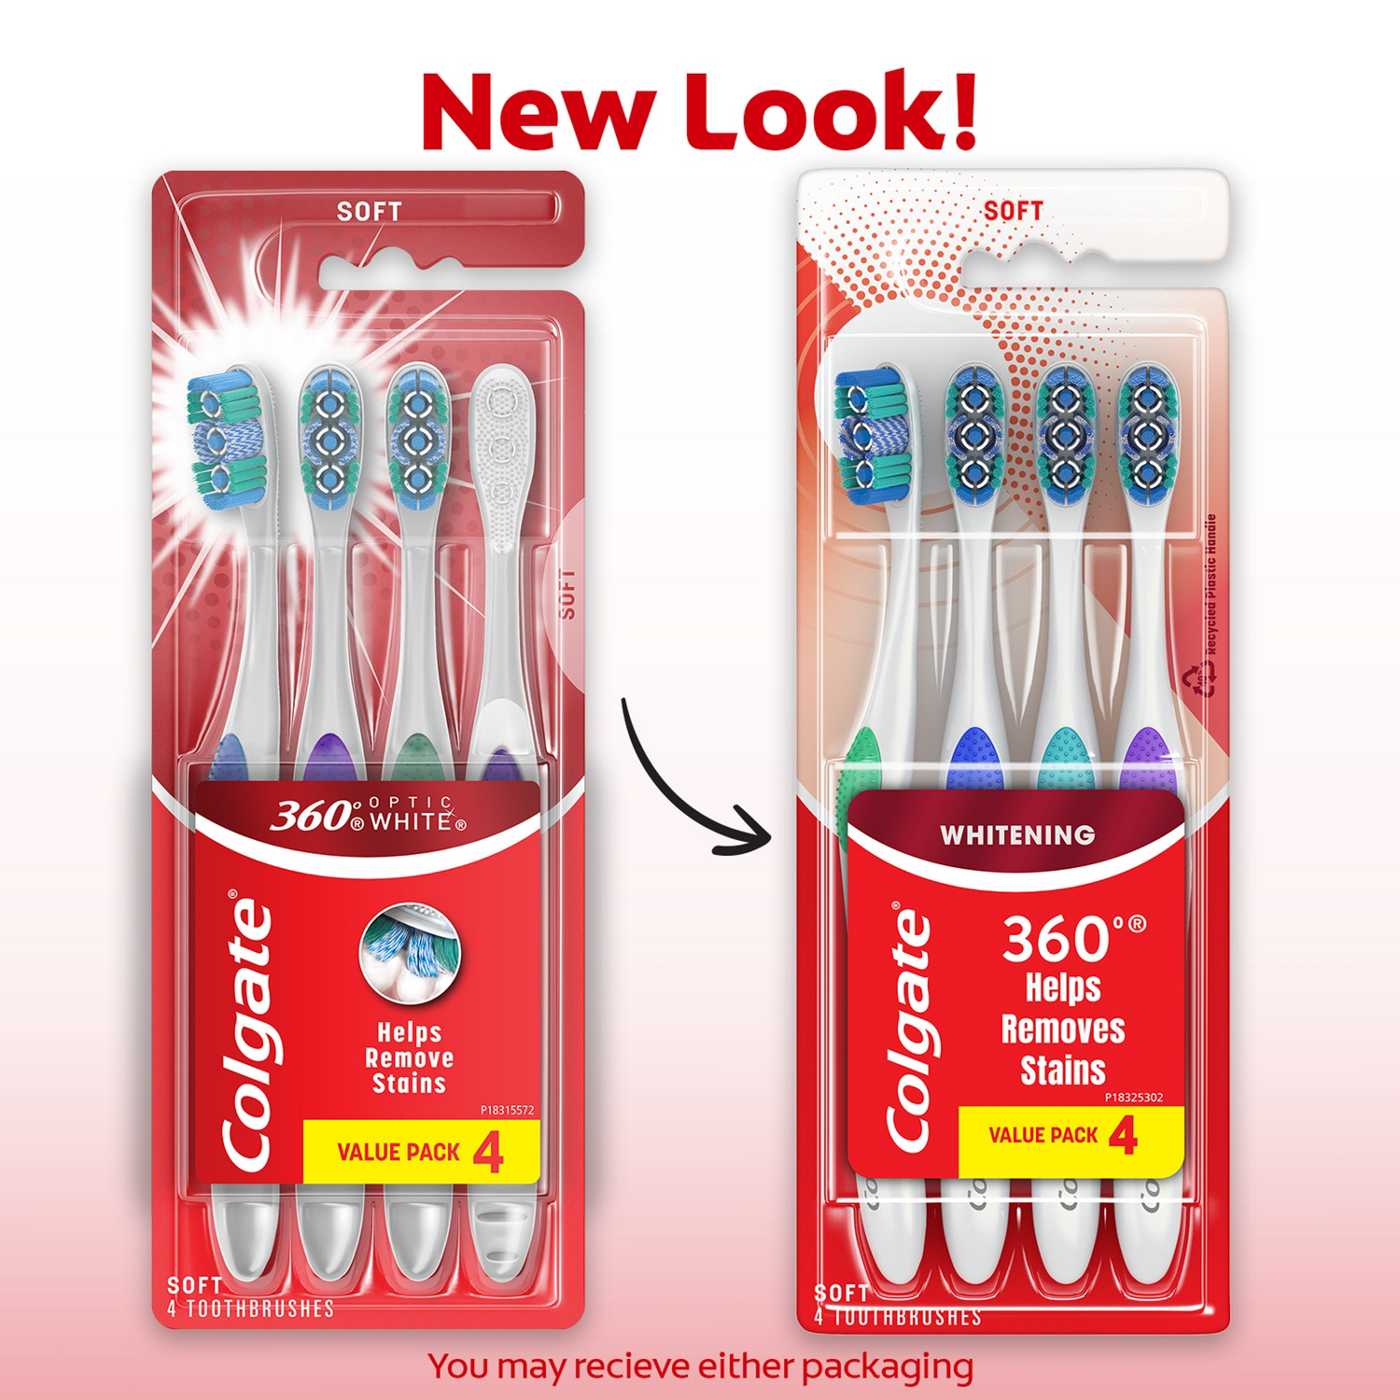 Colgate 360 Optic White Toothbrushes - Soft; image 2 of 9